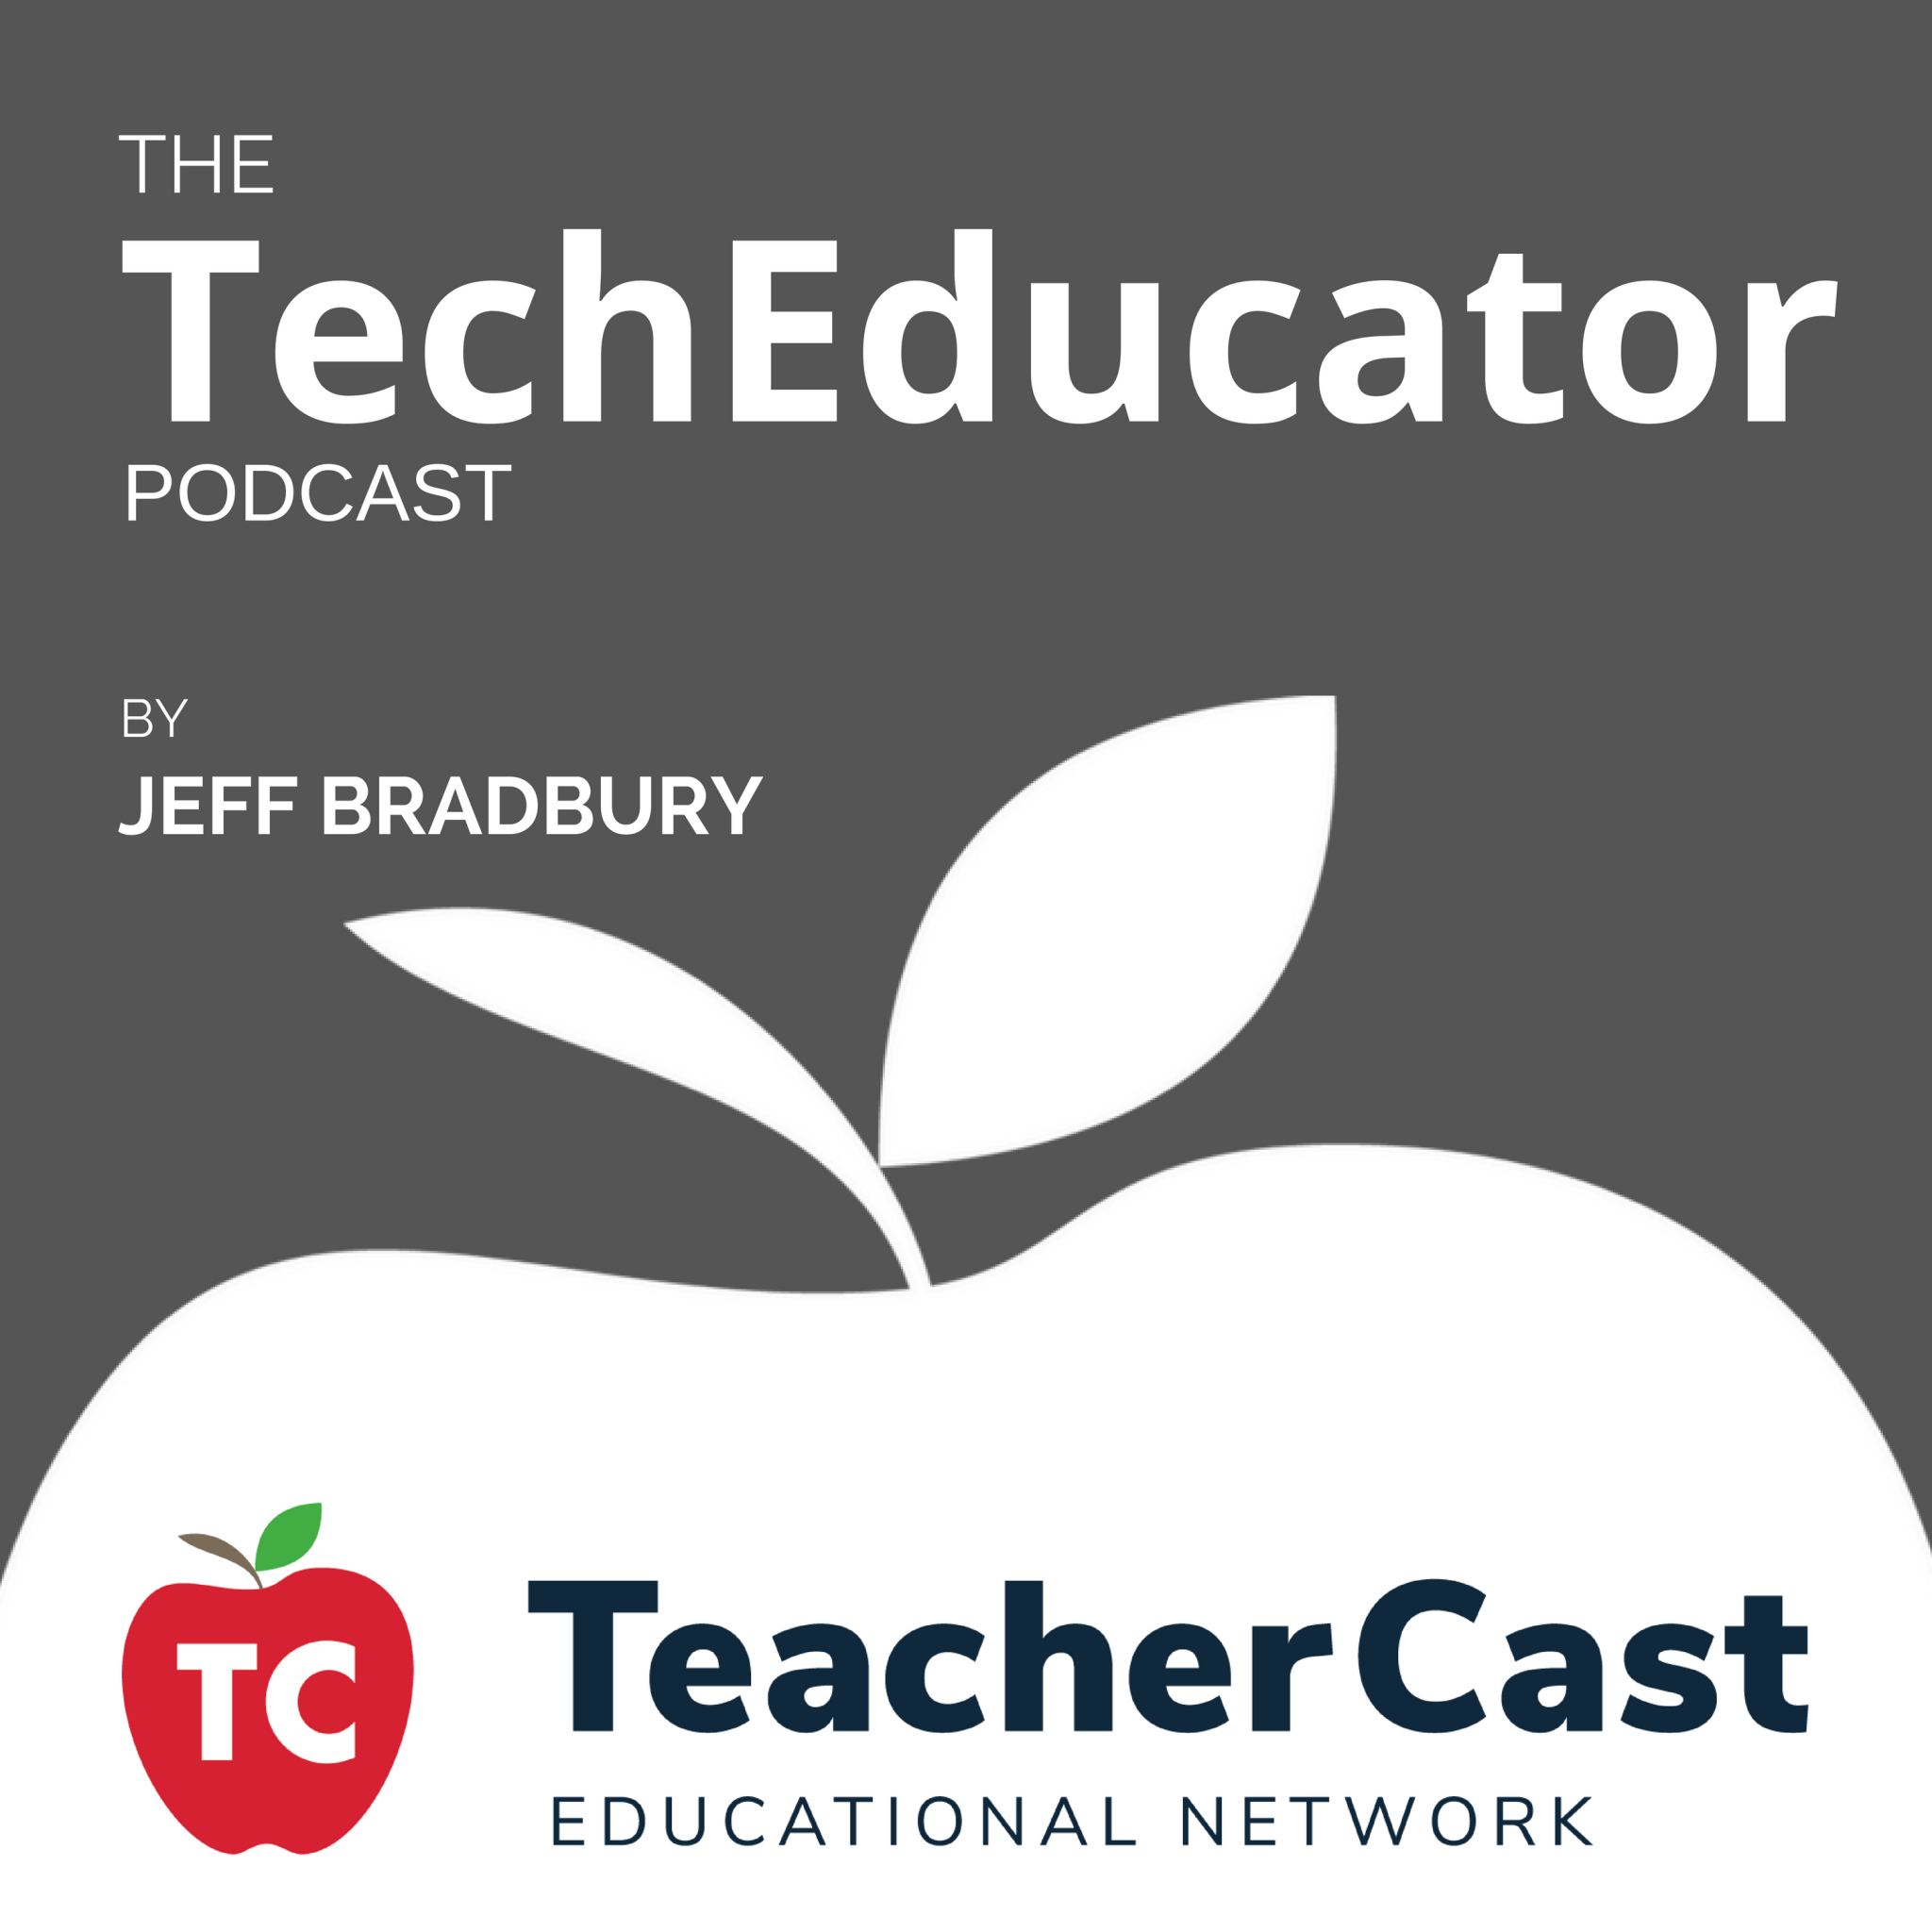 The TechEducator Podcast